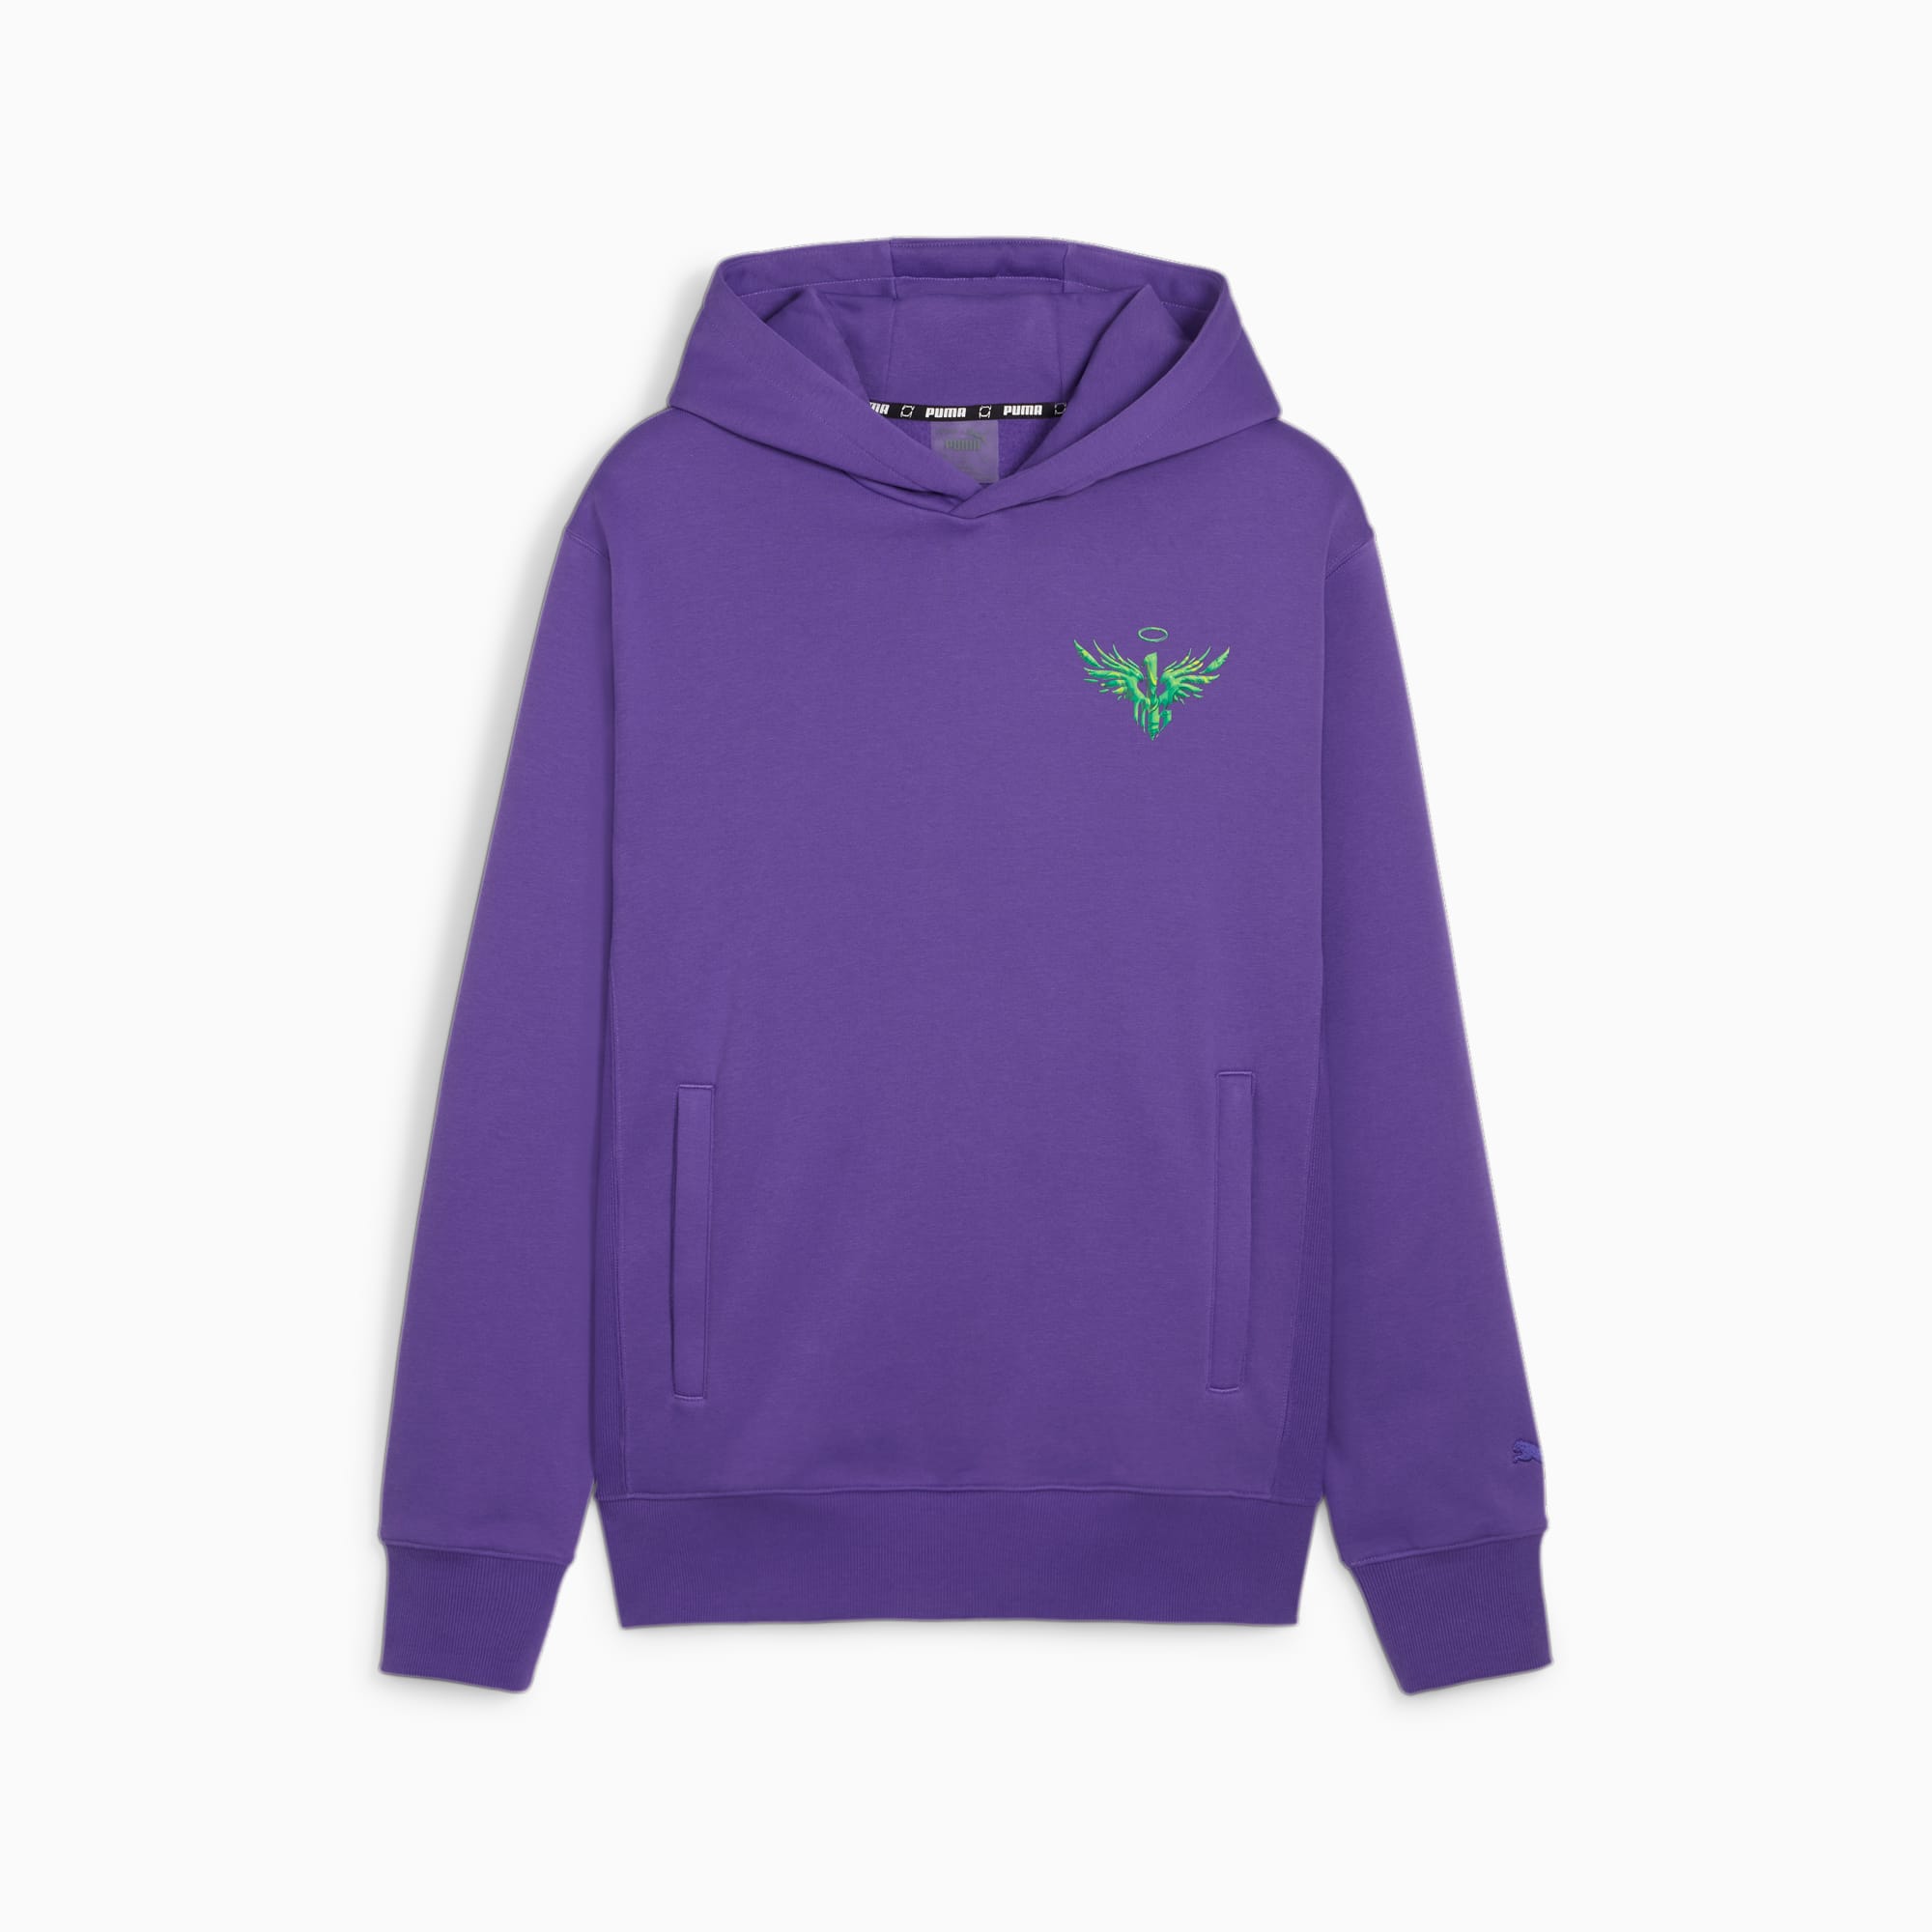 PUMA Melo X Toxic Men's Basketball Hoodie, Violet, Size XS, Clothing